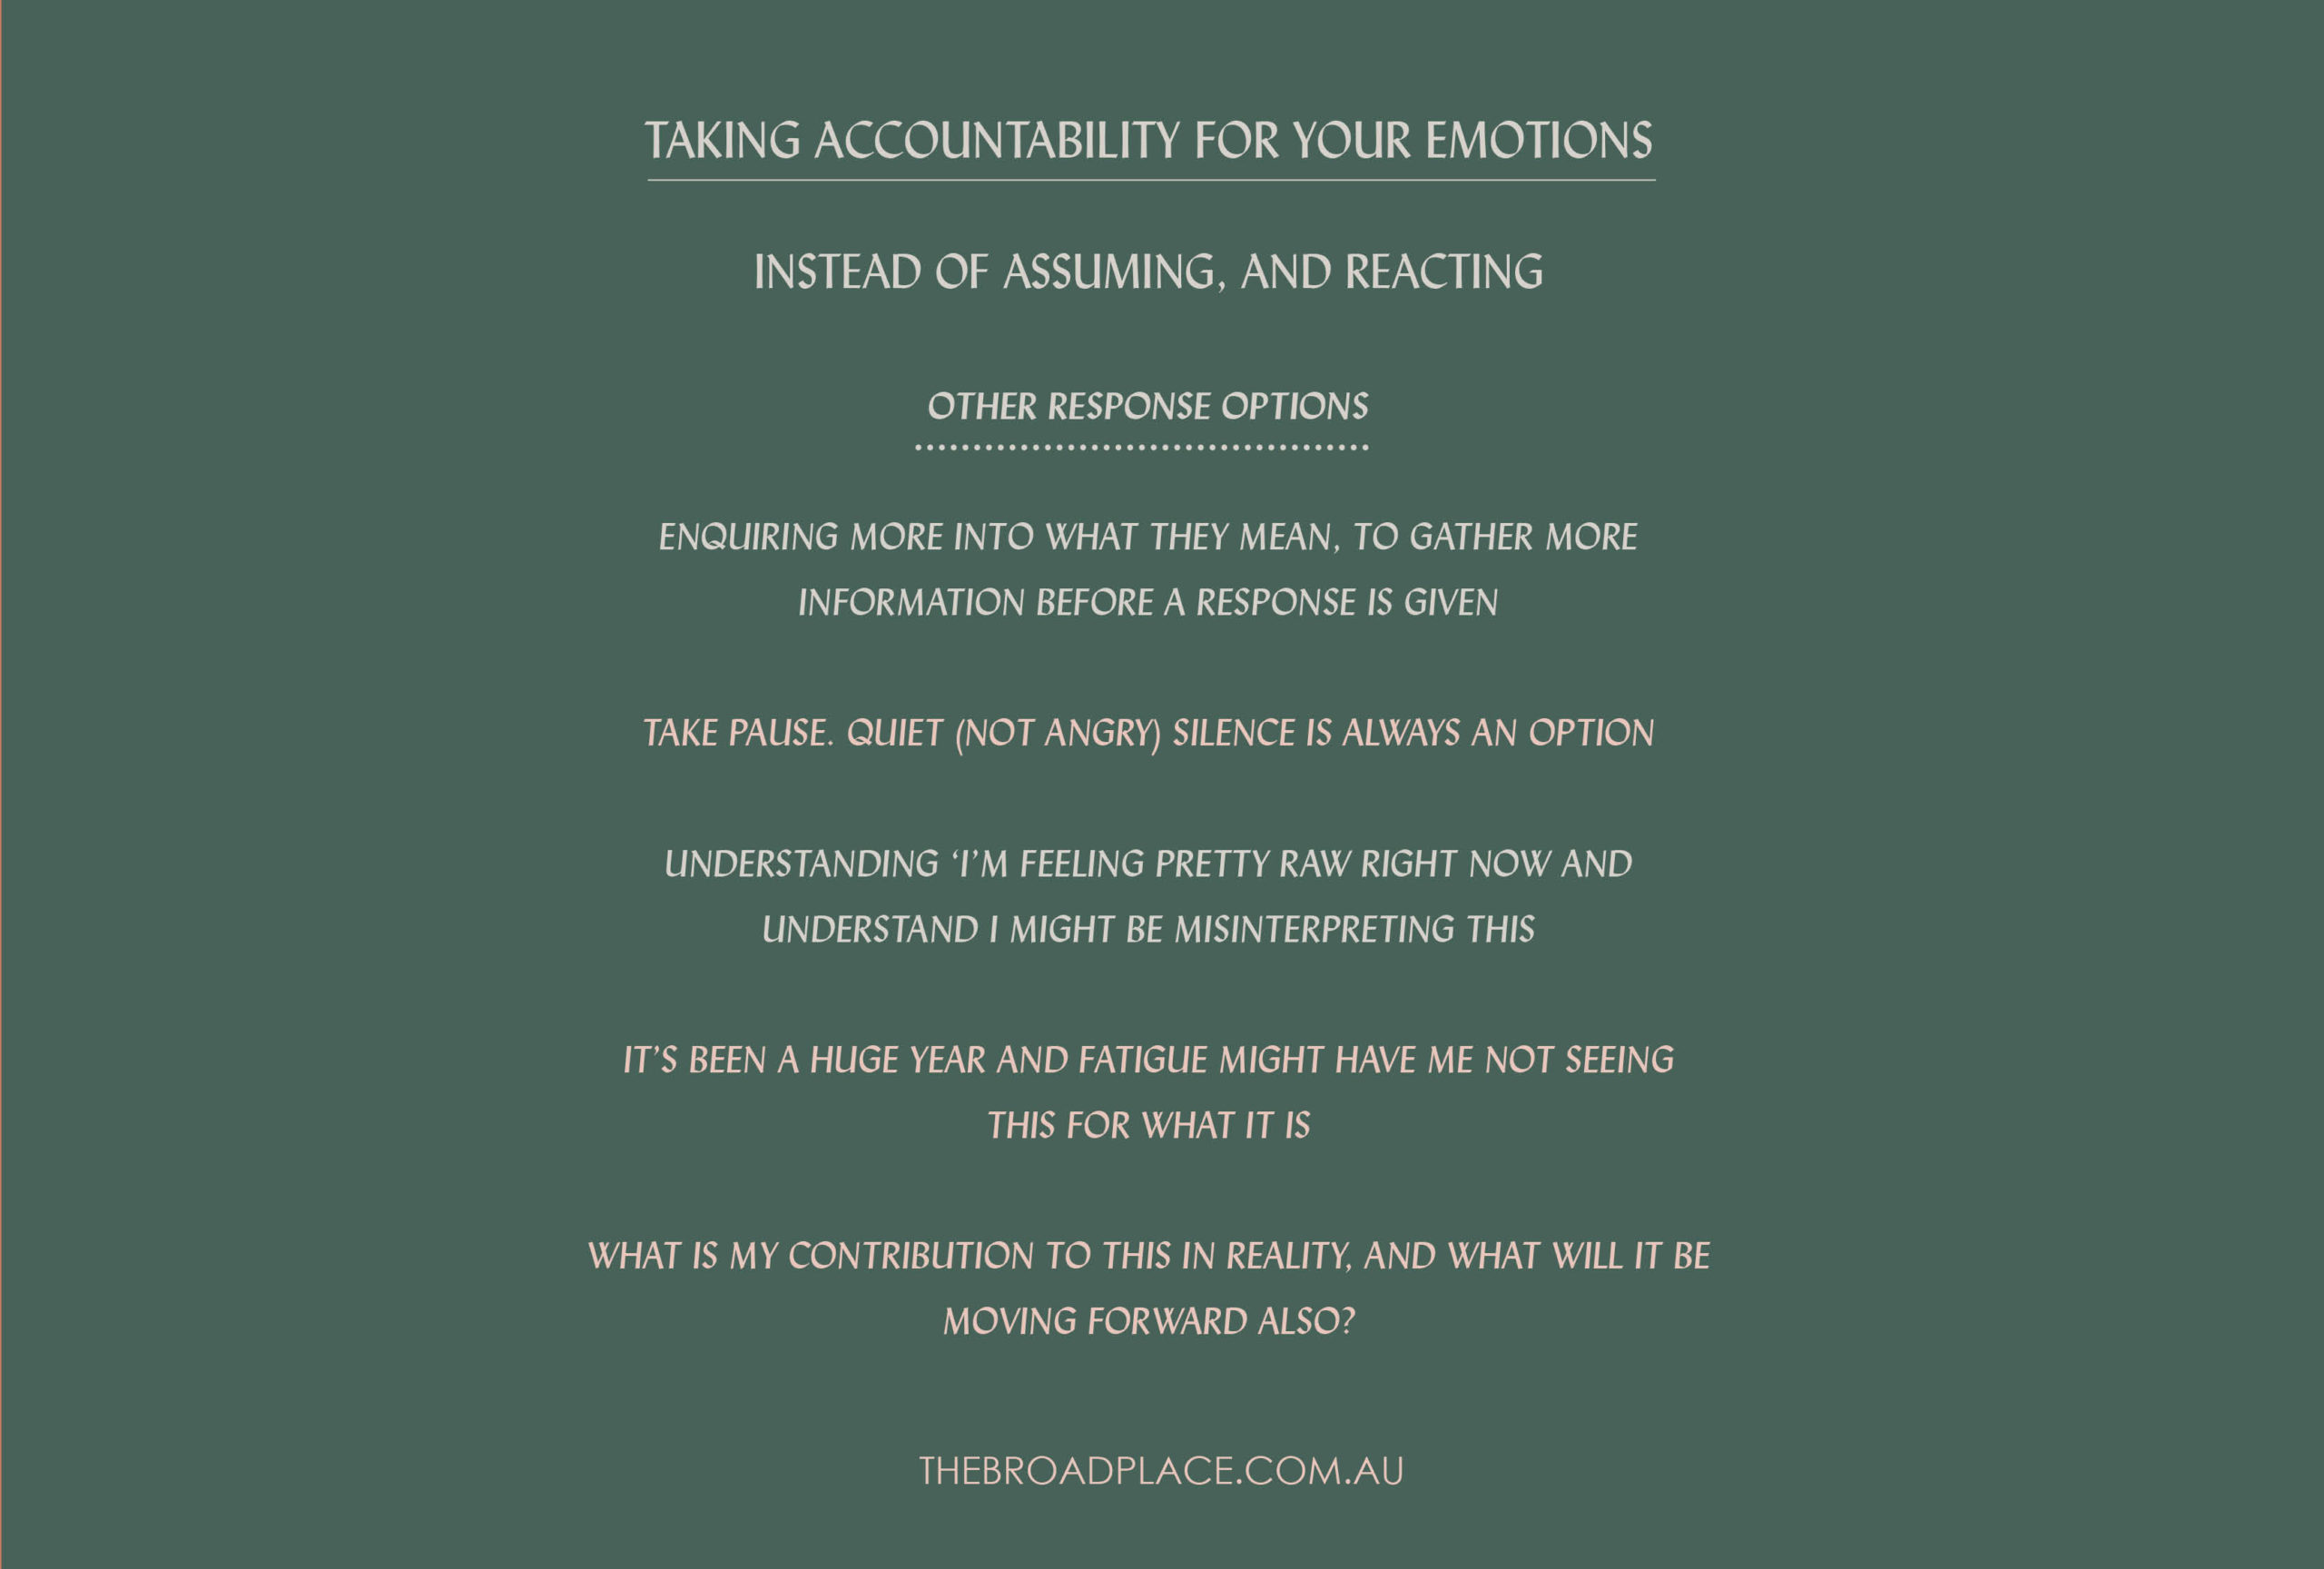 L E T T E R from Jac – How To Take Accountability For Your Emotions